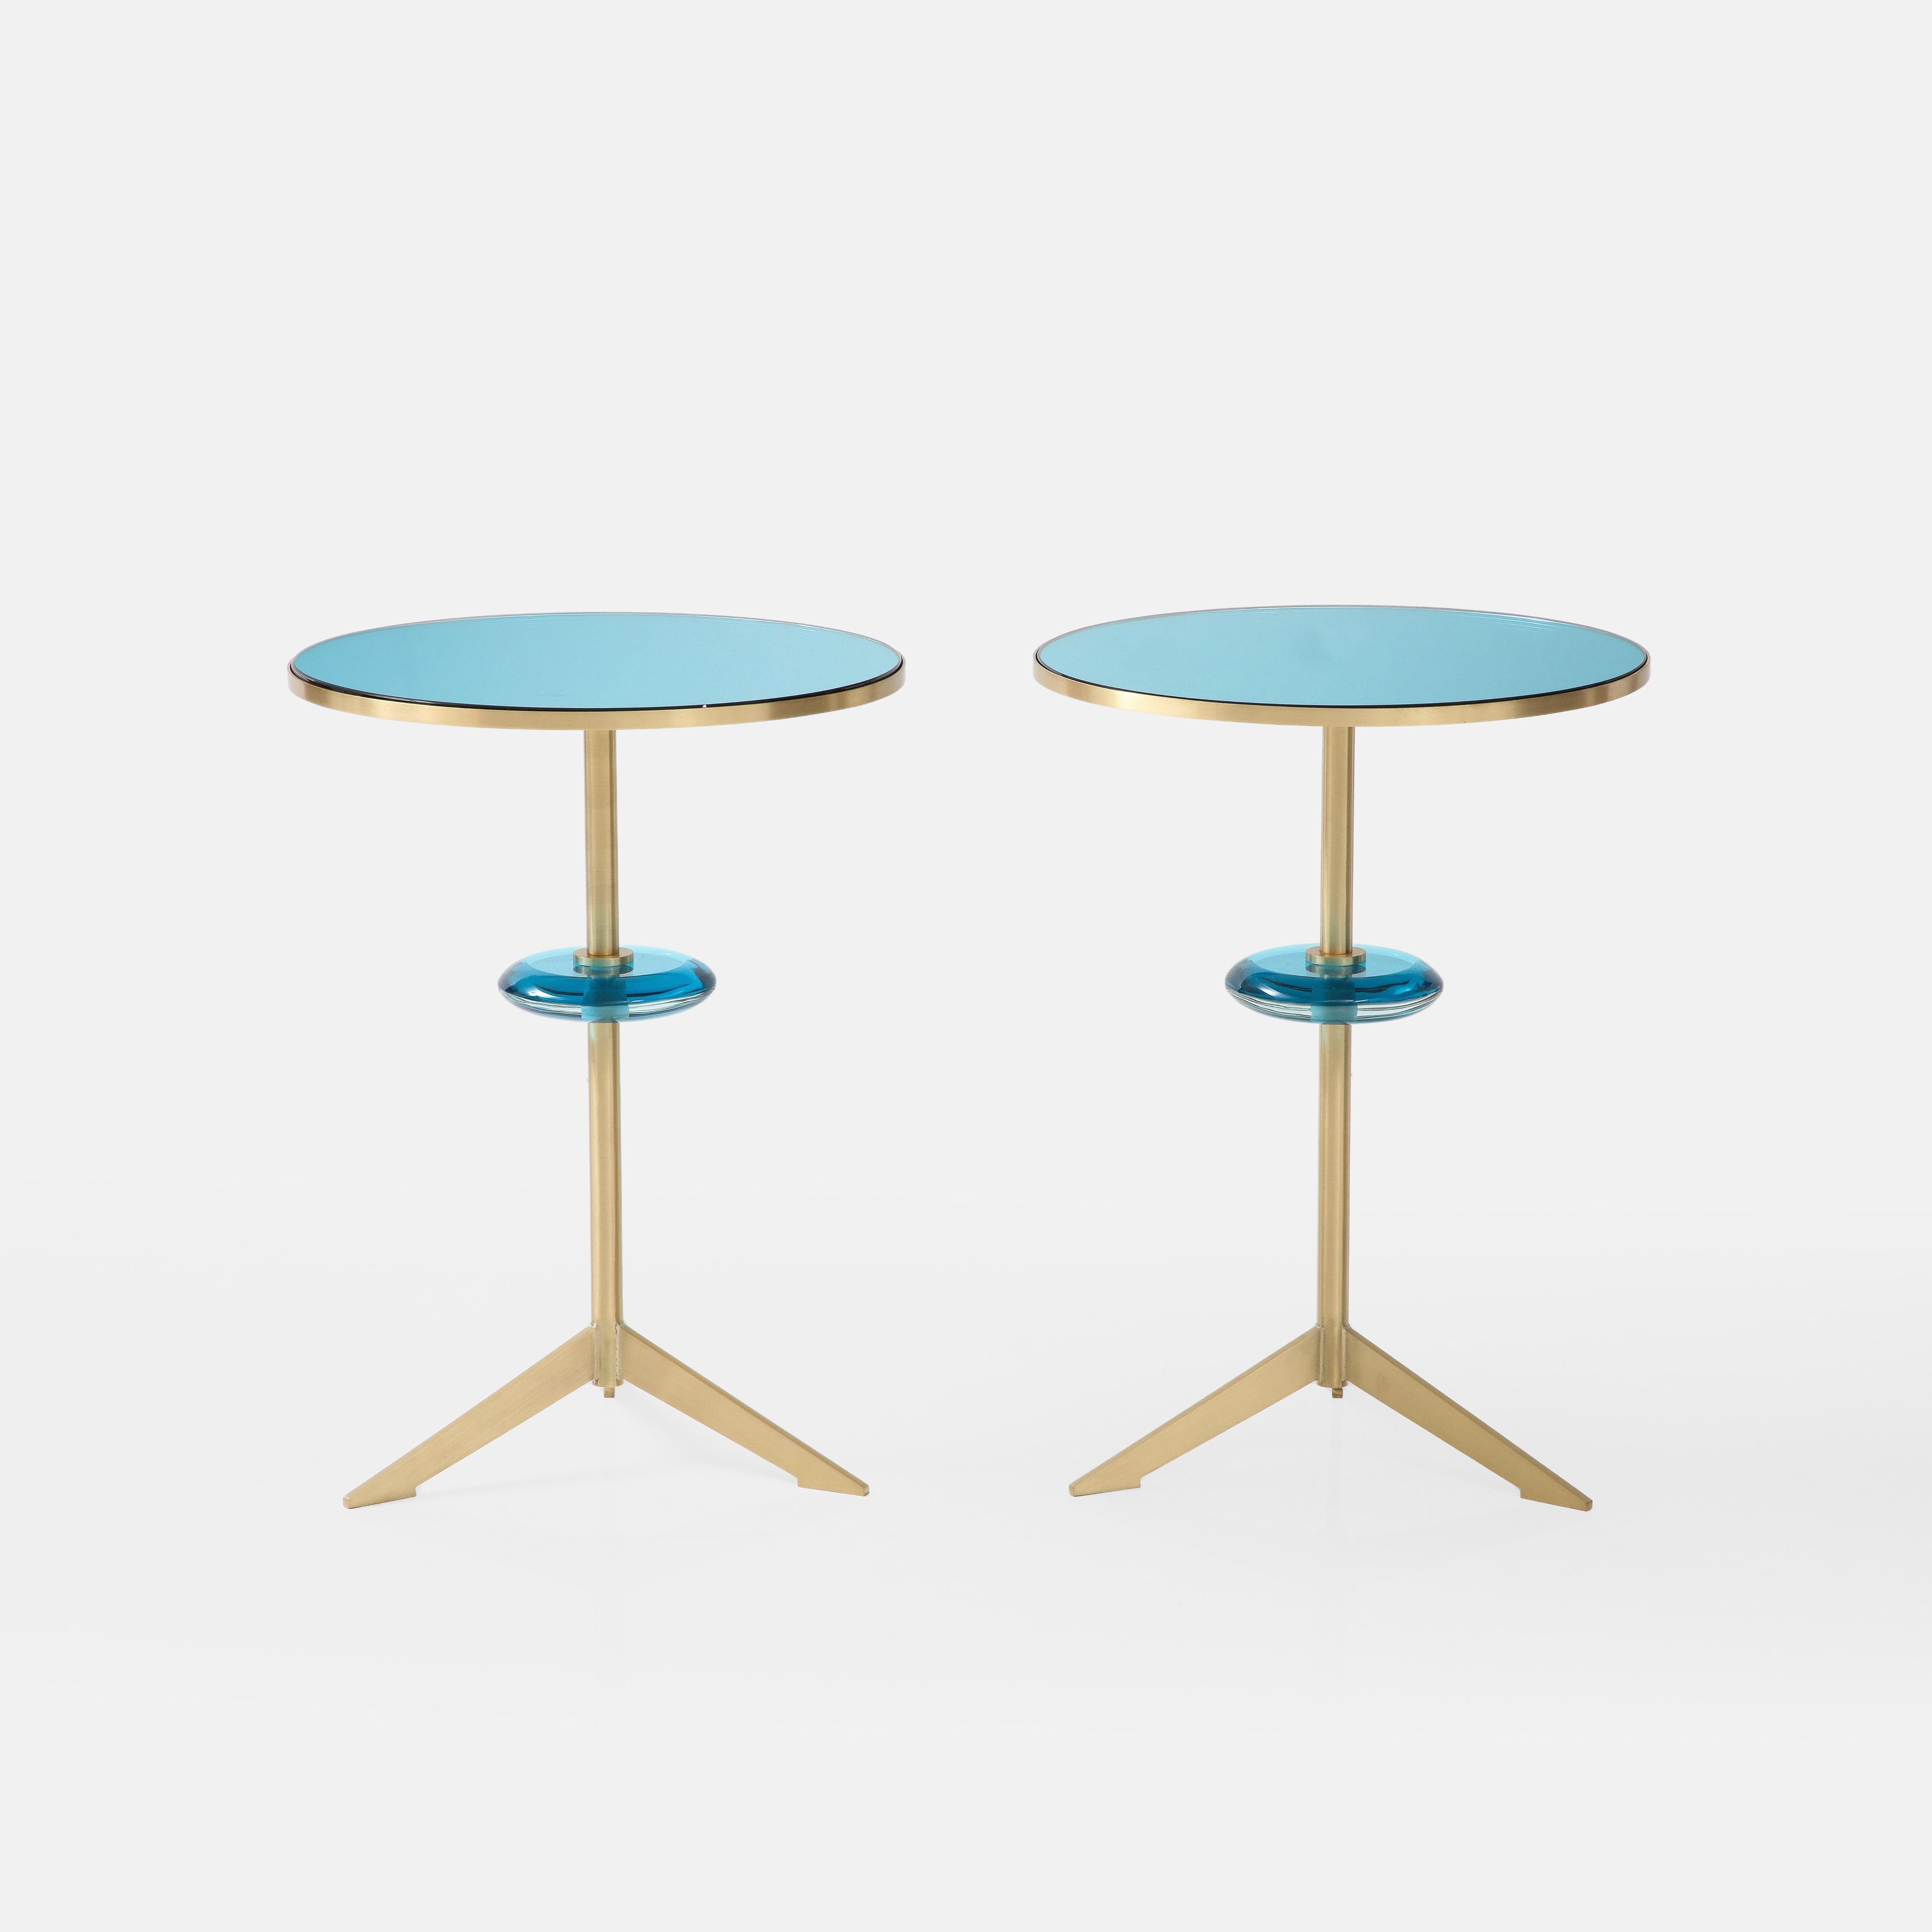 Italian Effetto Vetro Contemporary Custom Pair of Tripod Side Tables in Glass and Brass